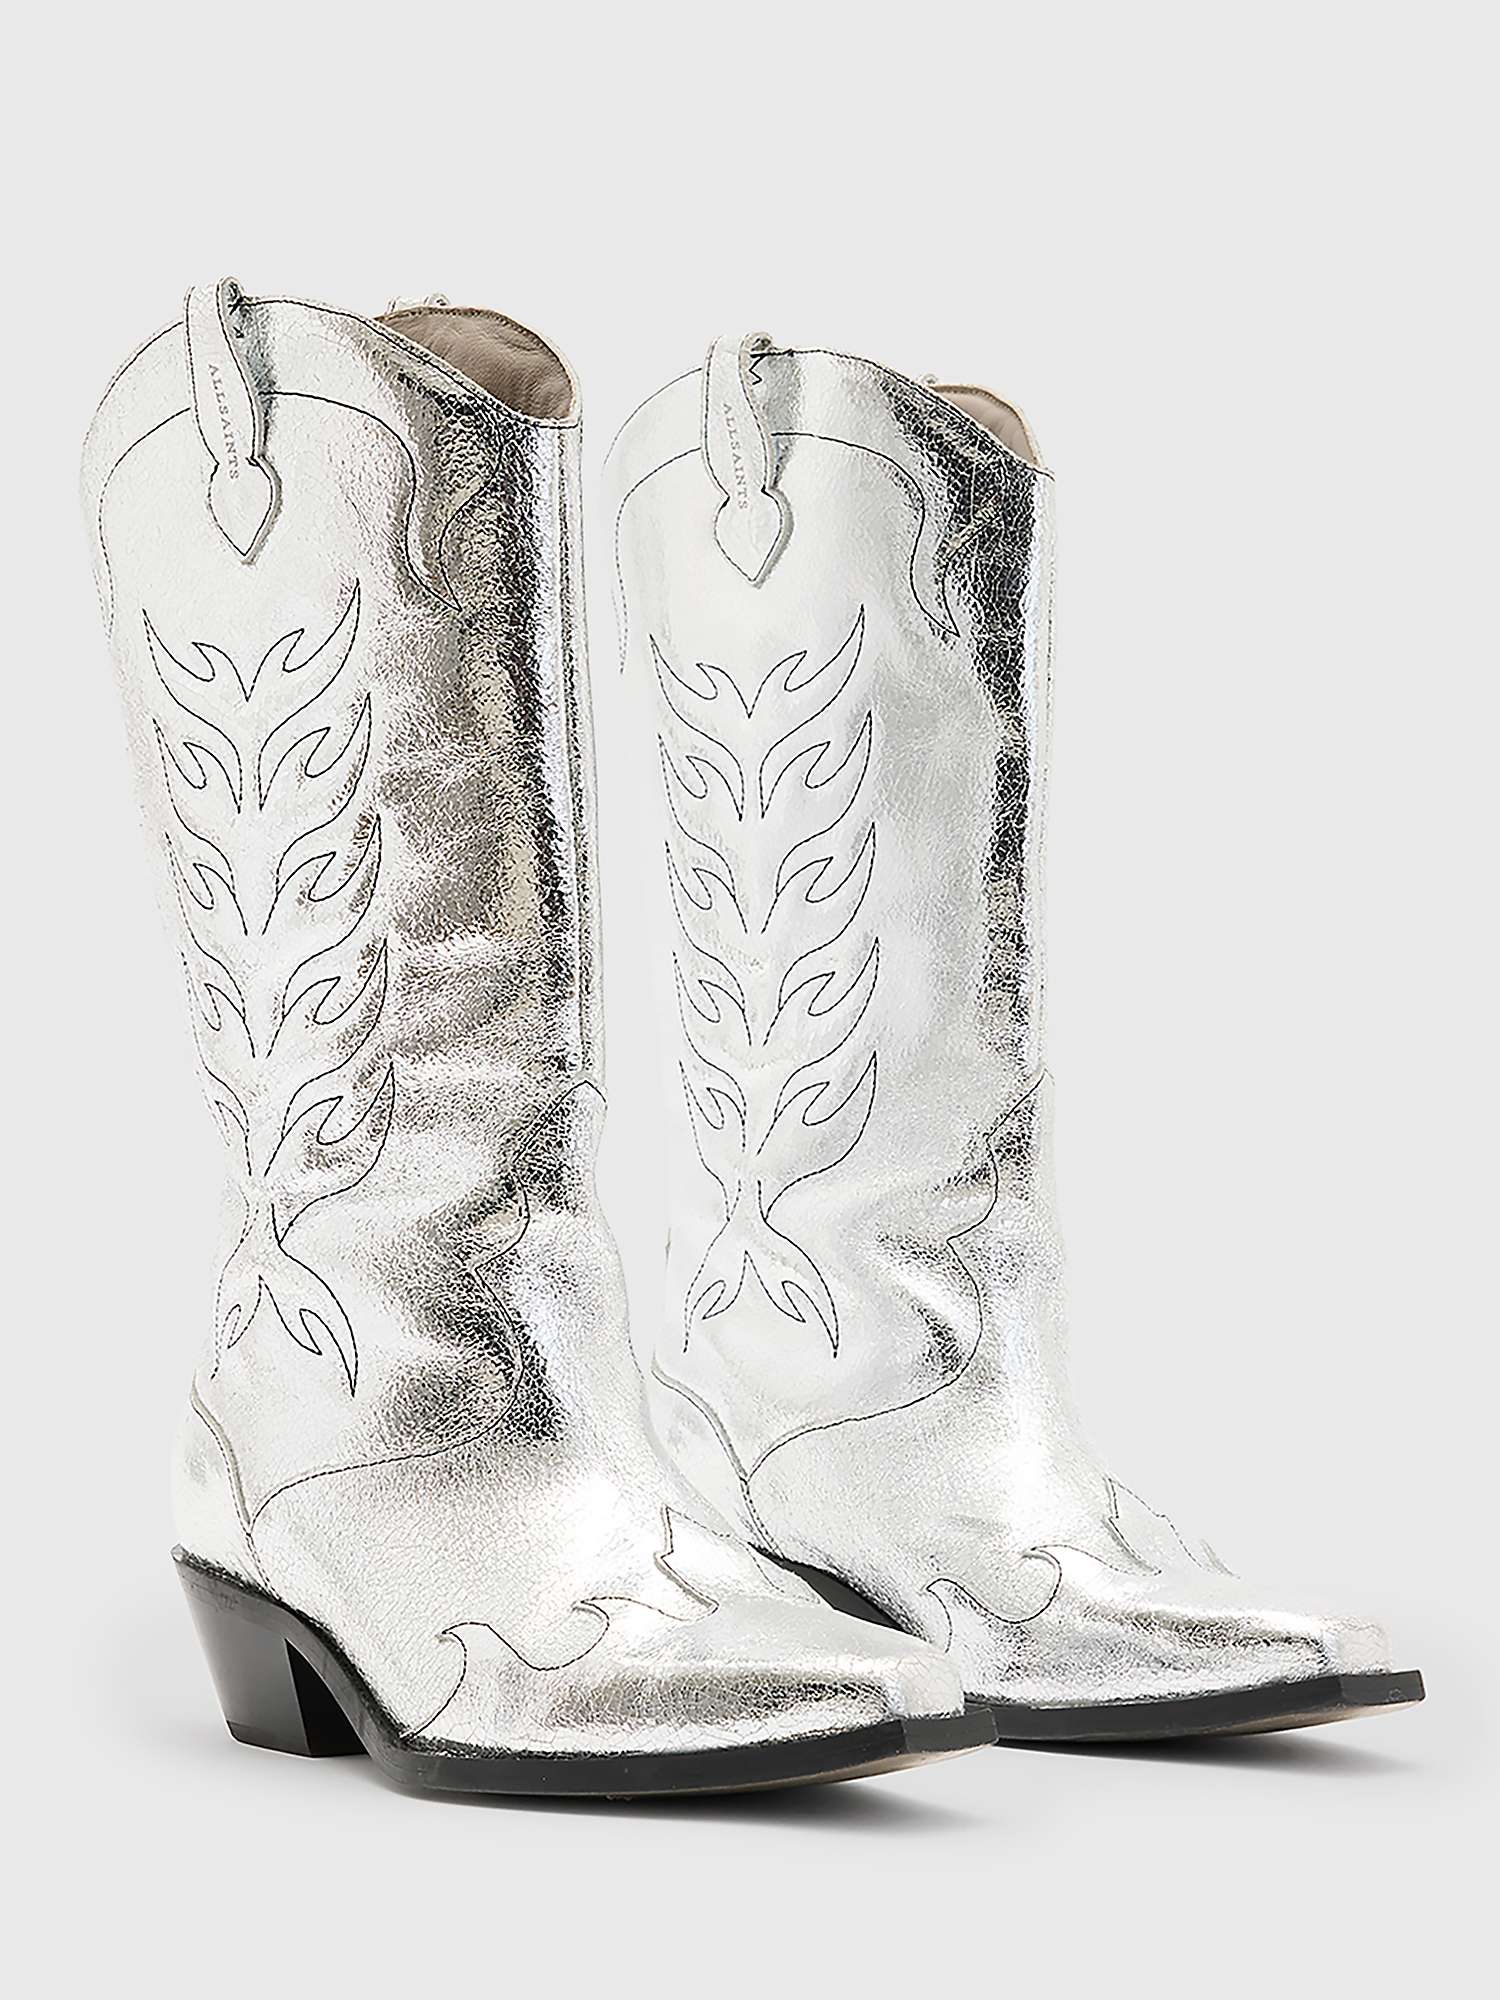 Buy AllSaints Dolly Leather Cowboy Boots, Metallic Silver Online at johnlewis.com